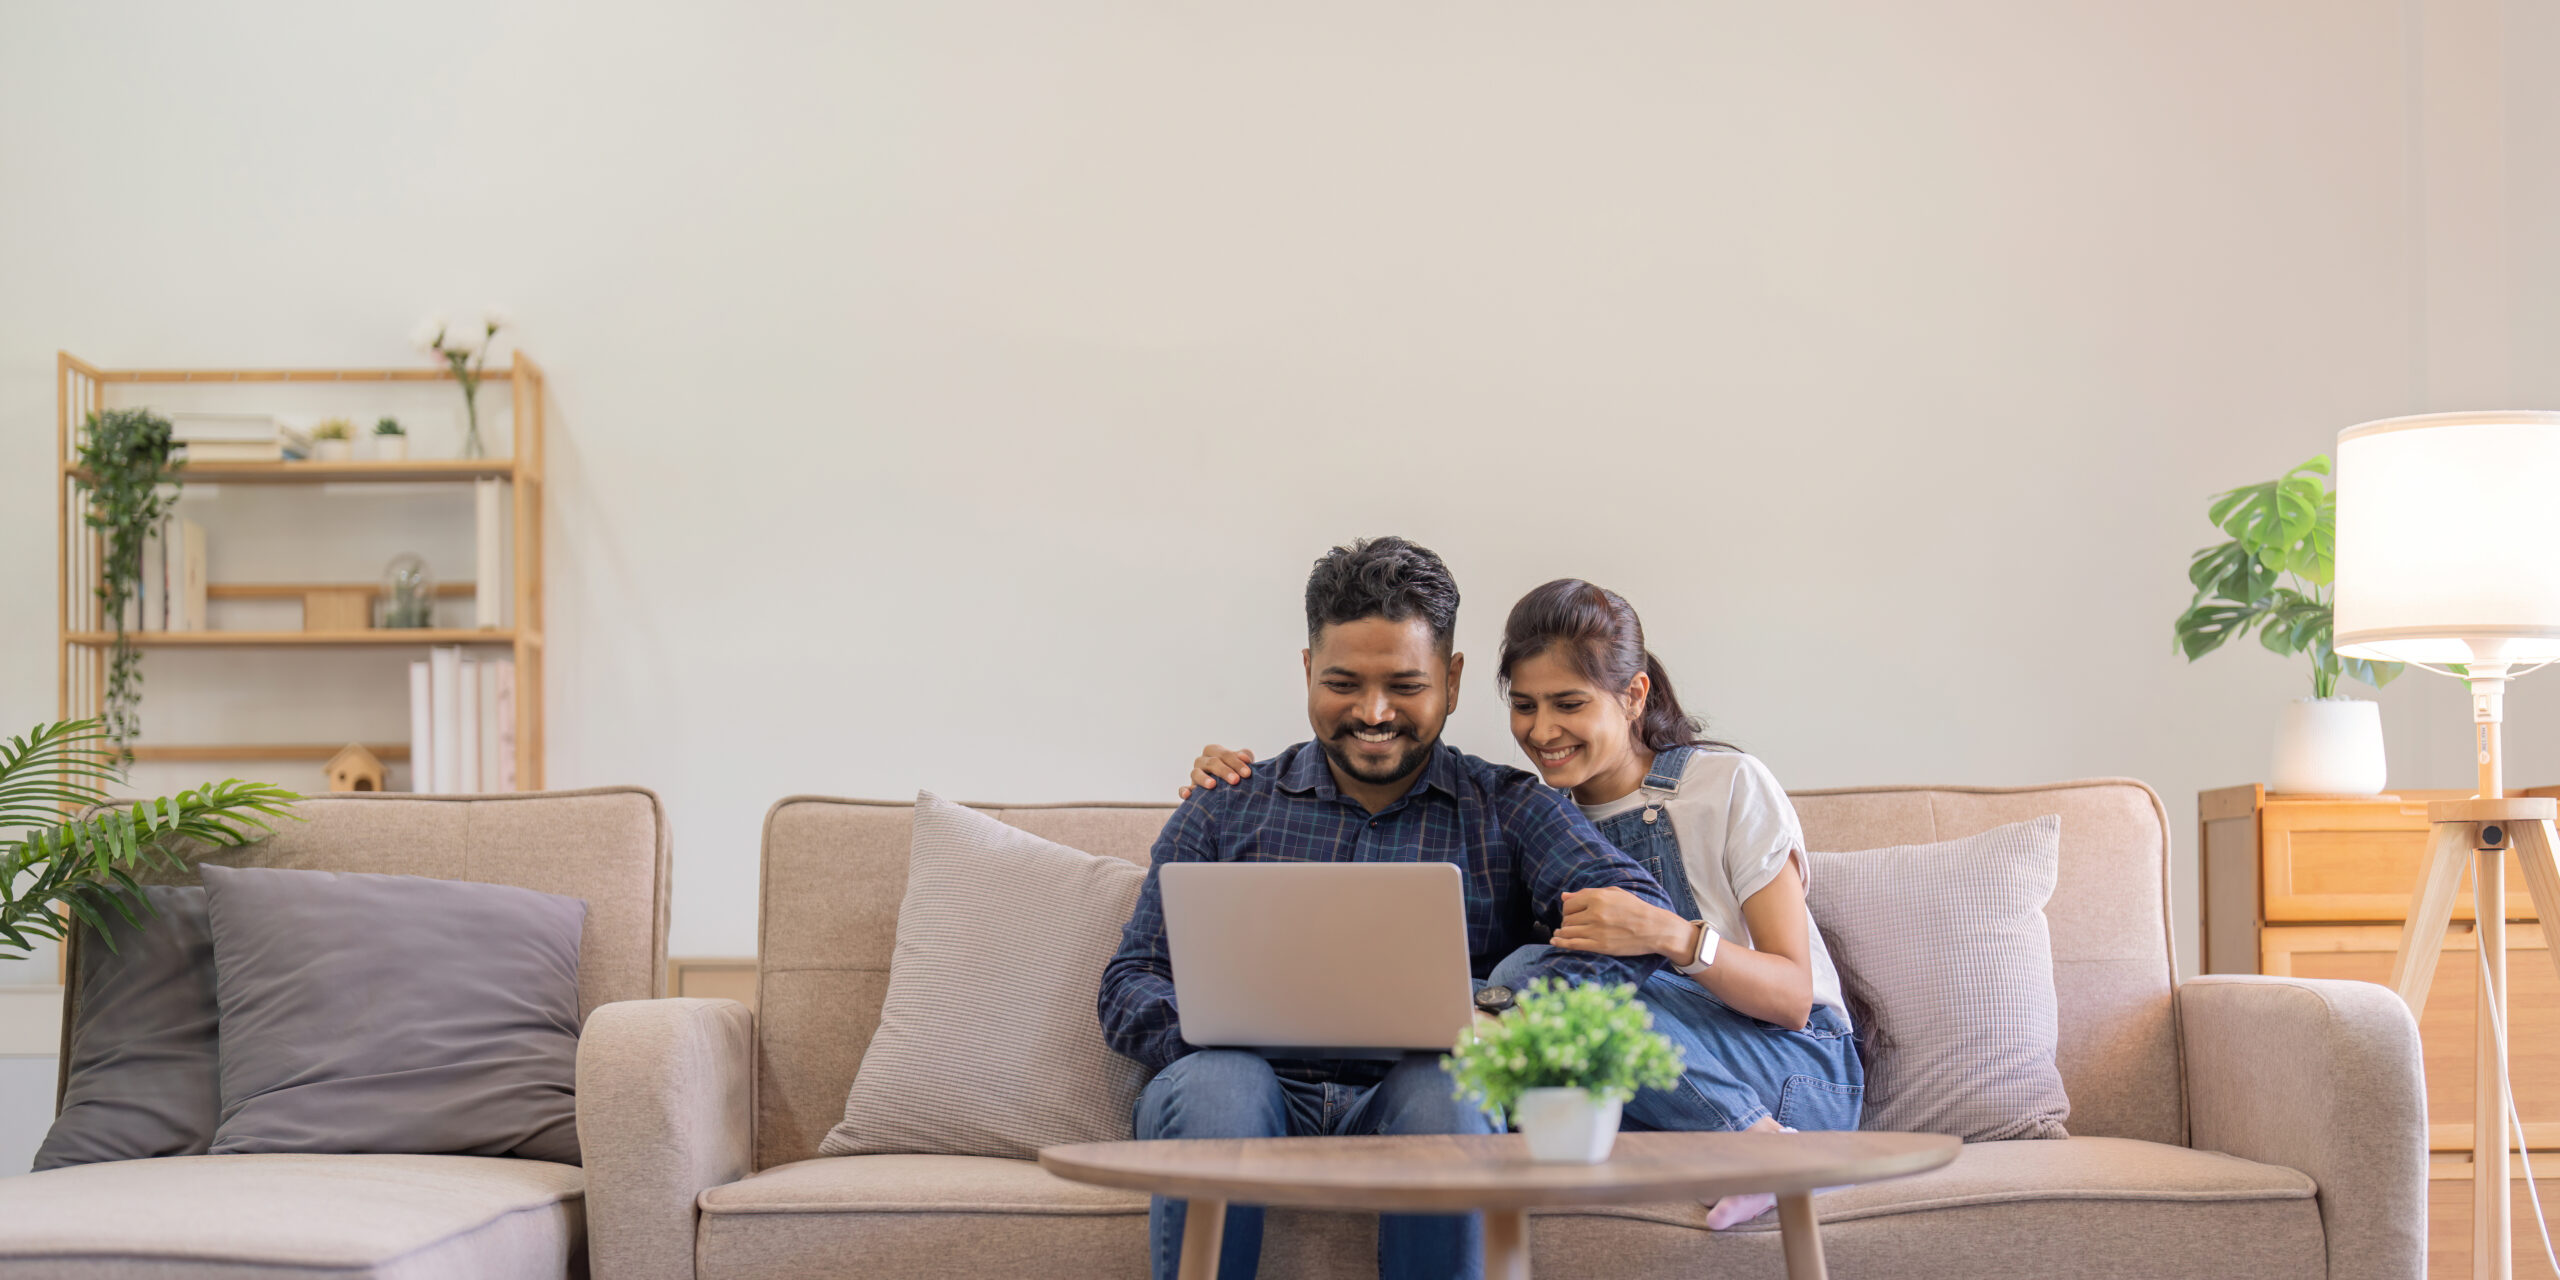 man and woman sitting on couch looking at open laptop and smiling